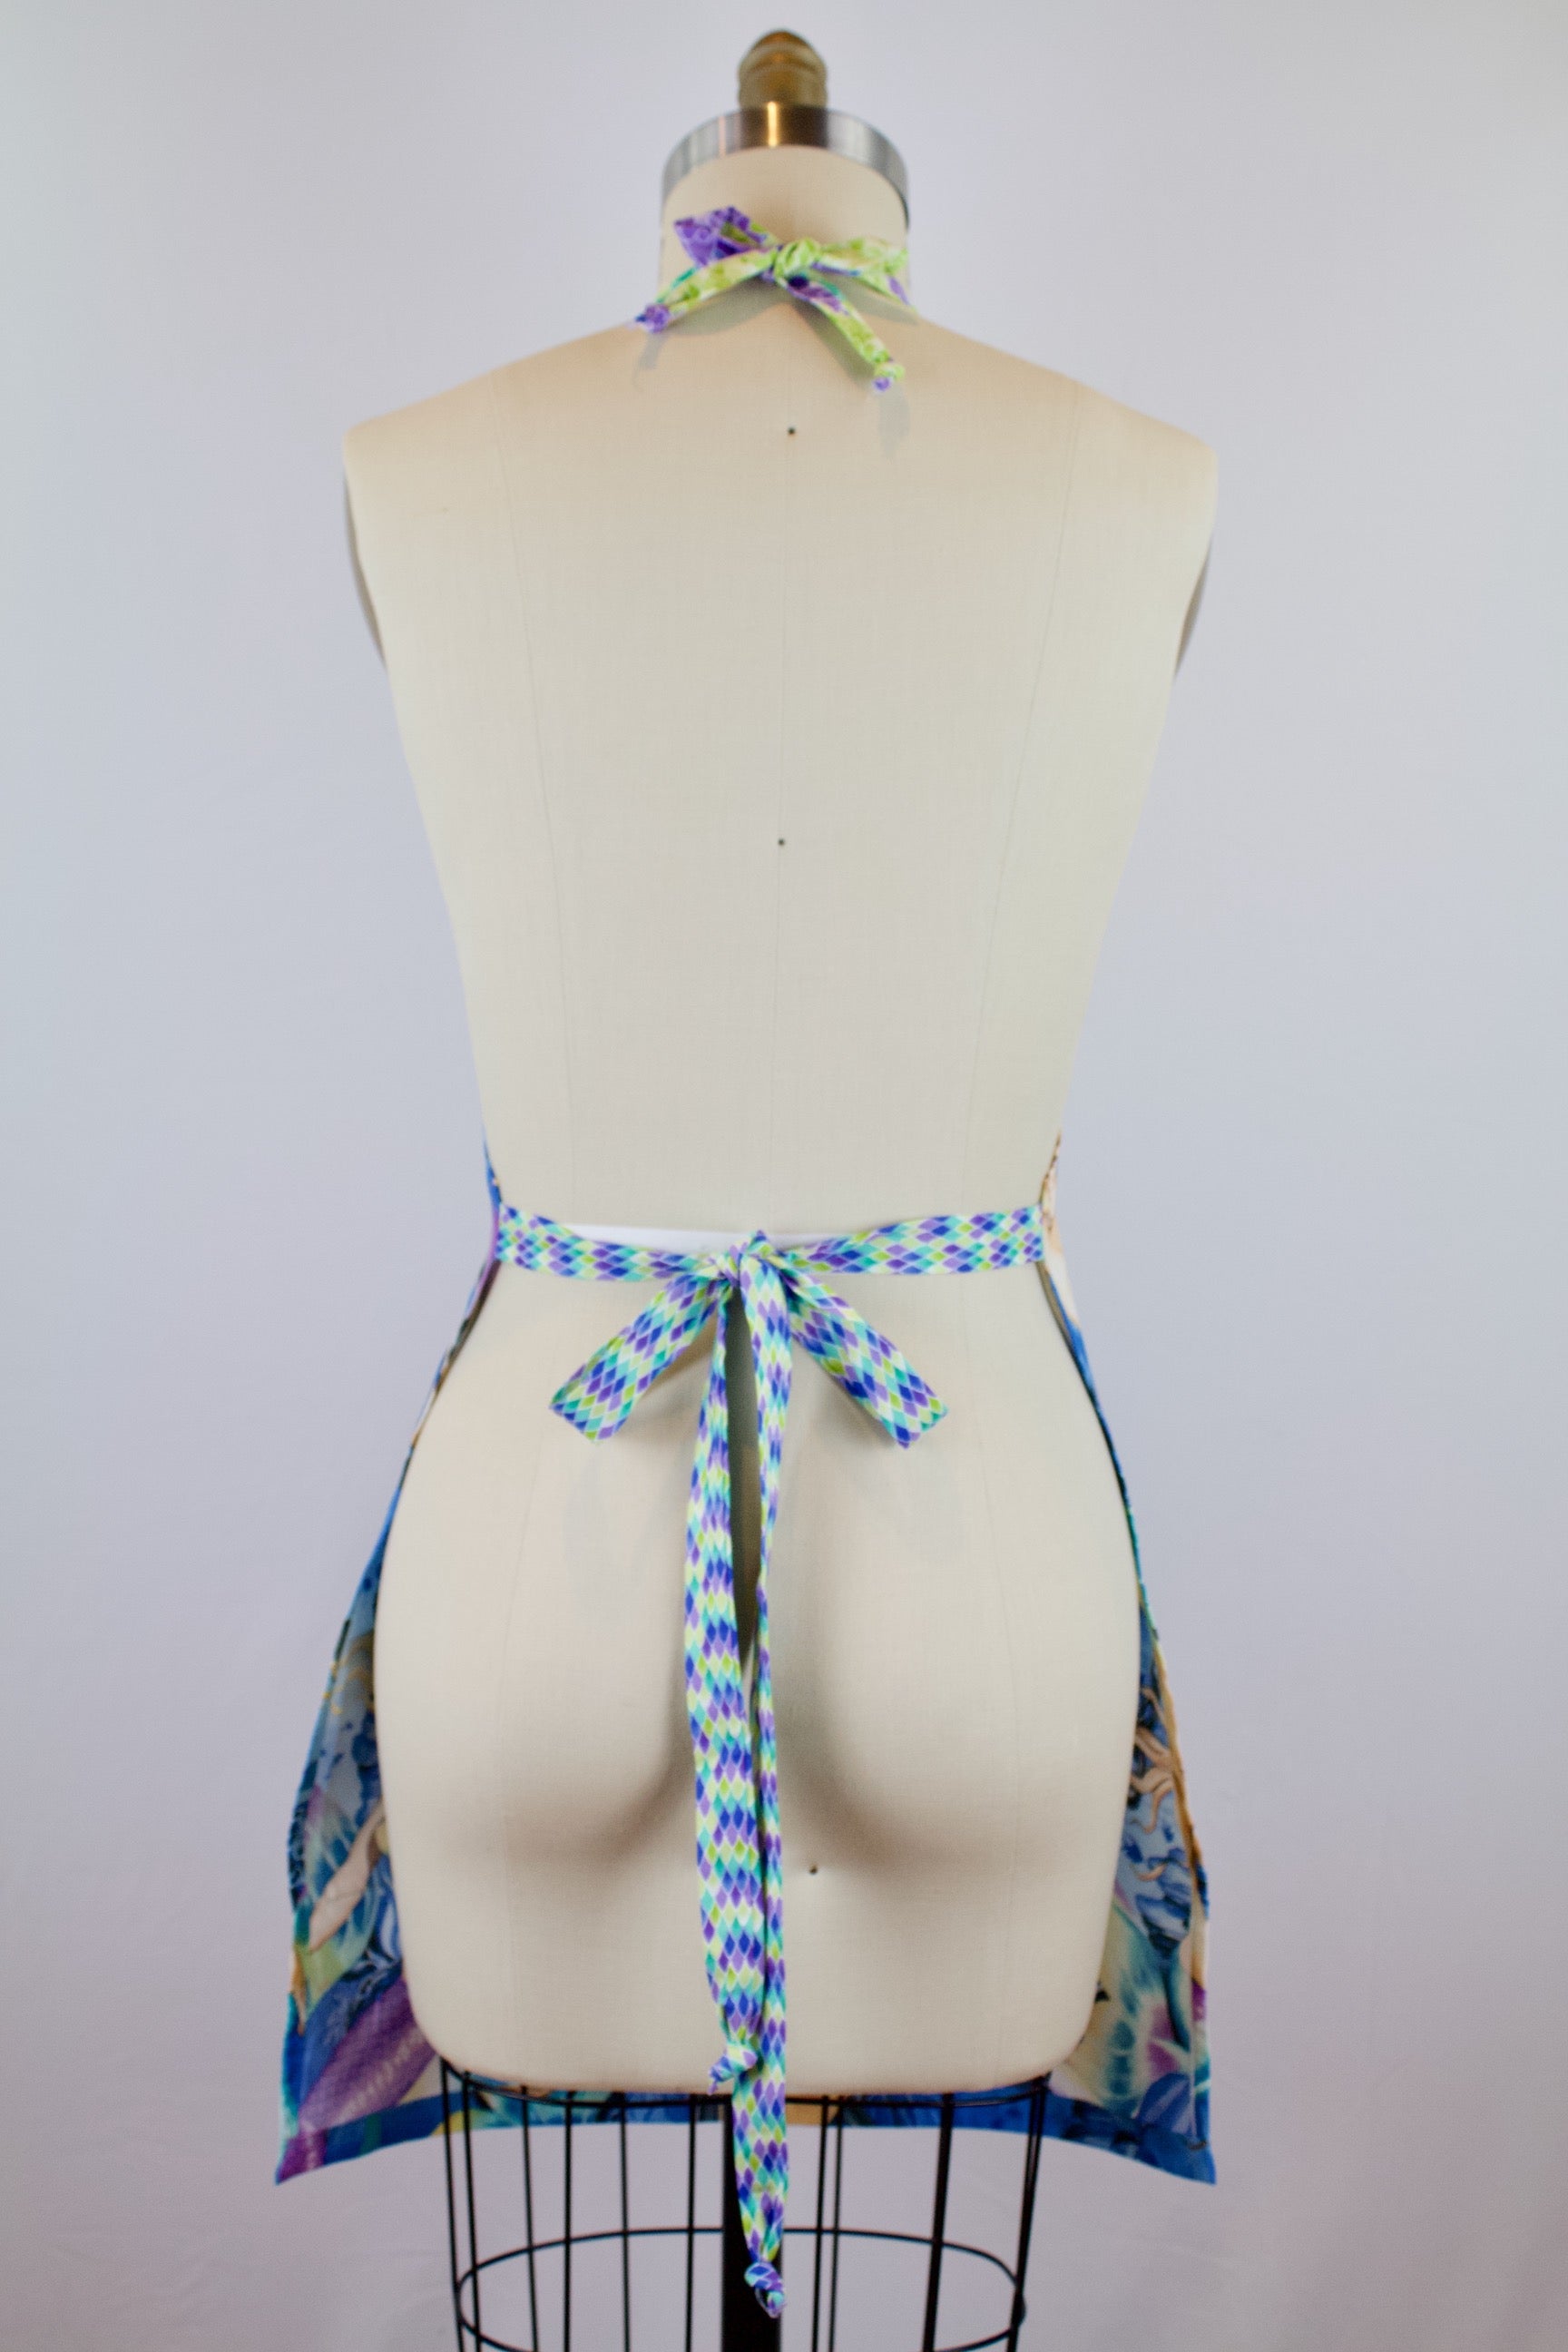 Sea Sirens Mermaid Apron-The Blue Peony-Age Group_Adult,Animal_Mermaid,Apron Style_Chef,Category_Apron,Color_Aqua,Color_Purple,Color_Teal,Department_Kitchen,Material_Cotton,Theme_Hunks,Theme_Summer,Theme_Tropical,Theme_Water Life